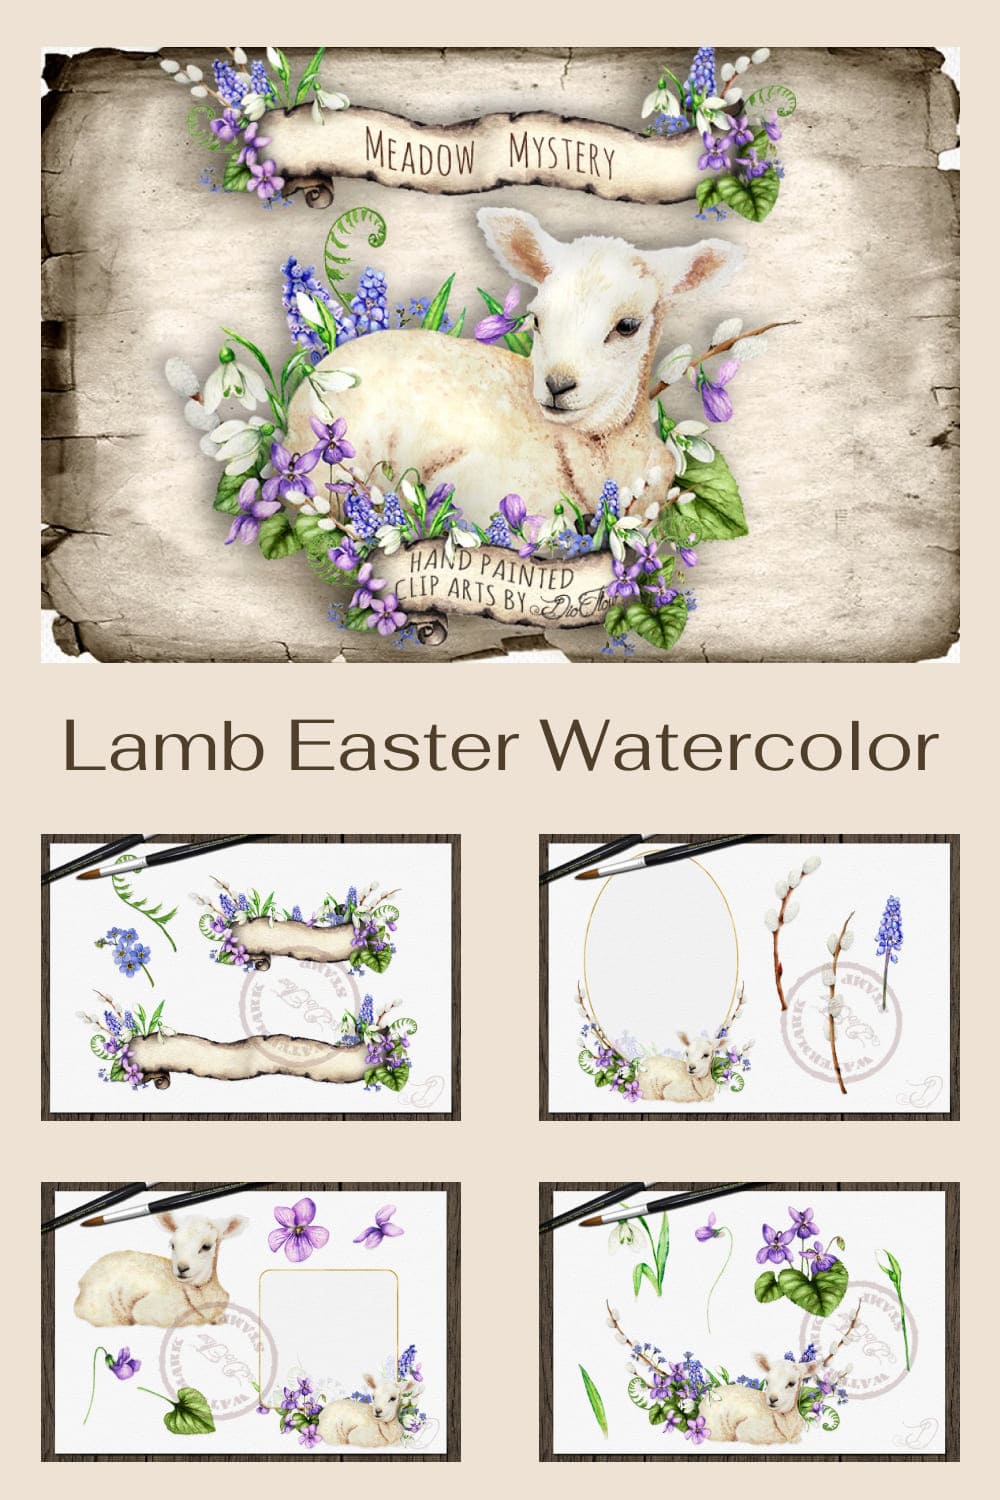 Watercolor drawing with 5 drawings of Easter Lamb and flowers, pinterest 1000x1500.